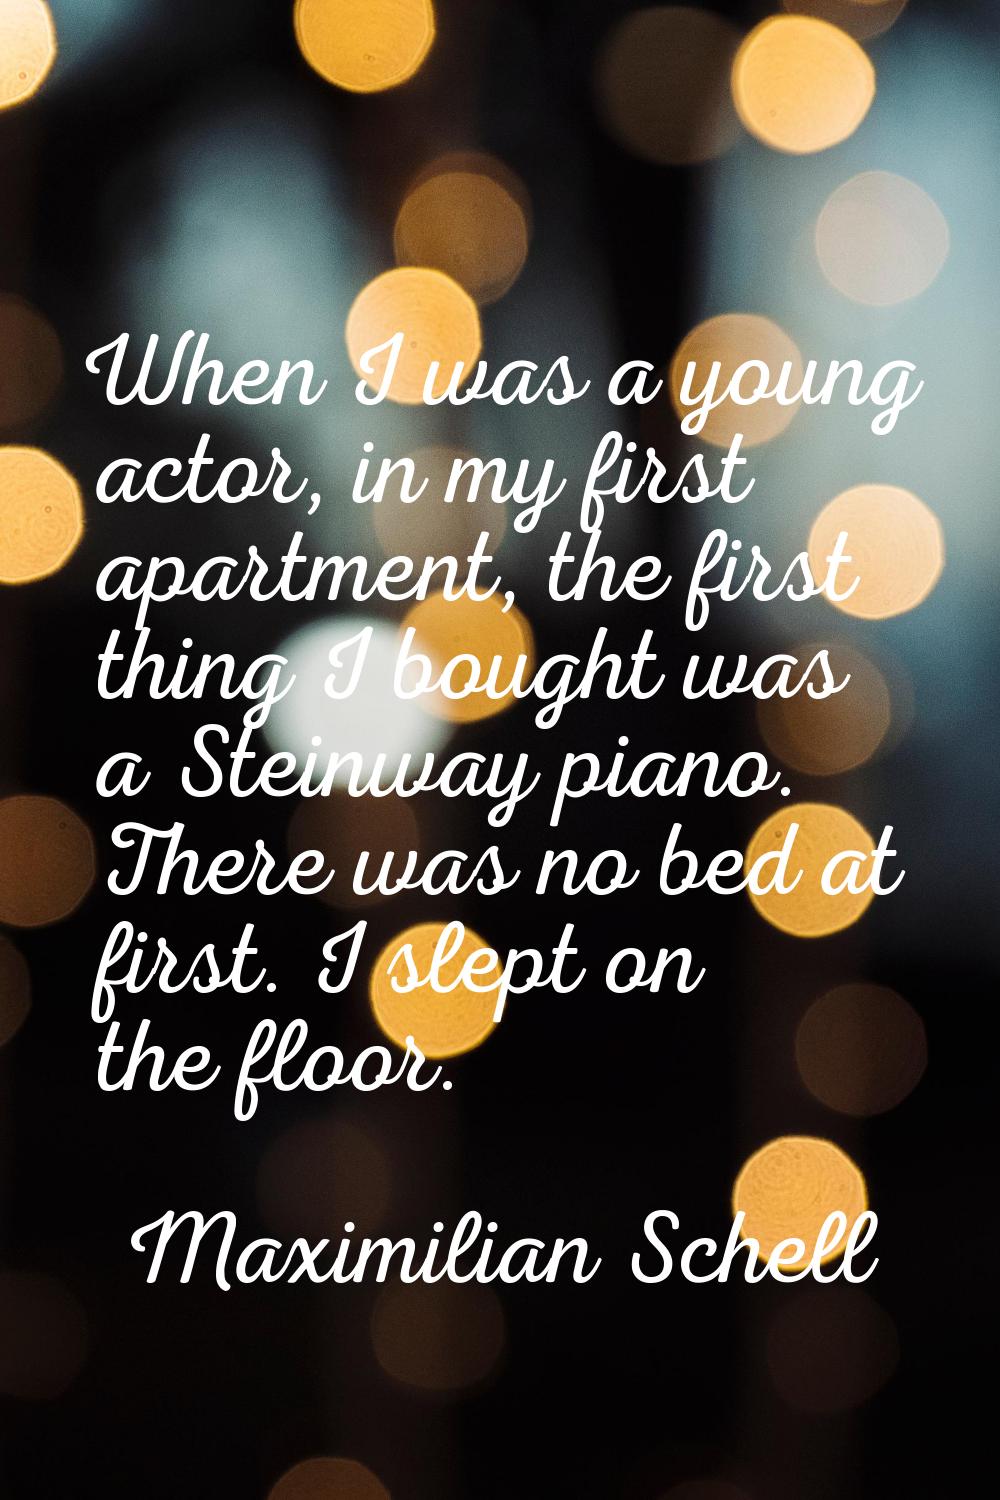 When I was a young actor, in my first apartment, the first thing I bought was a Steinway piano. The